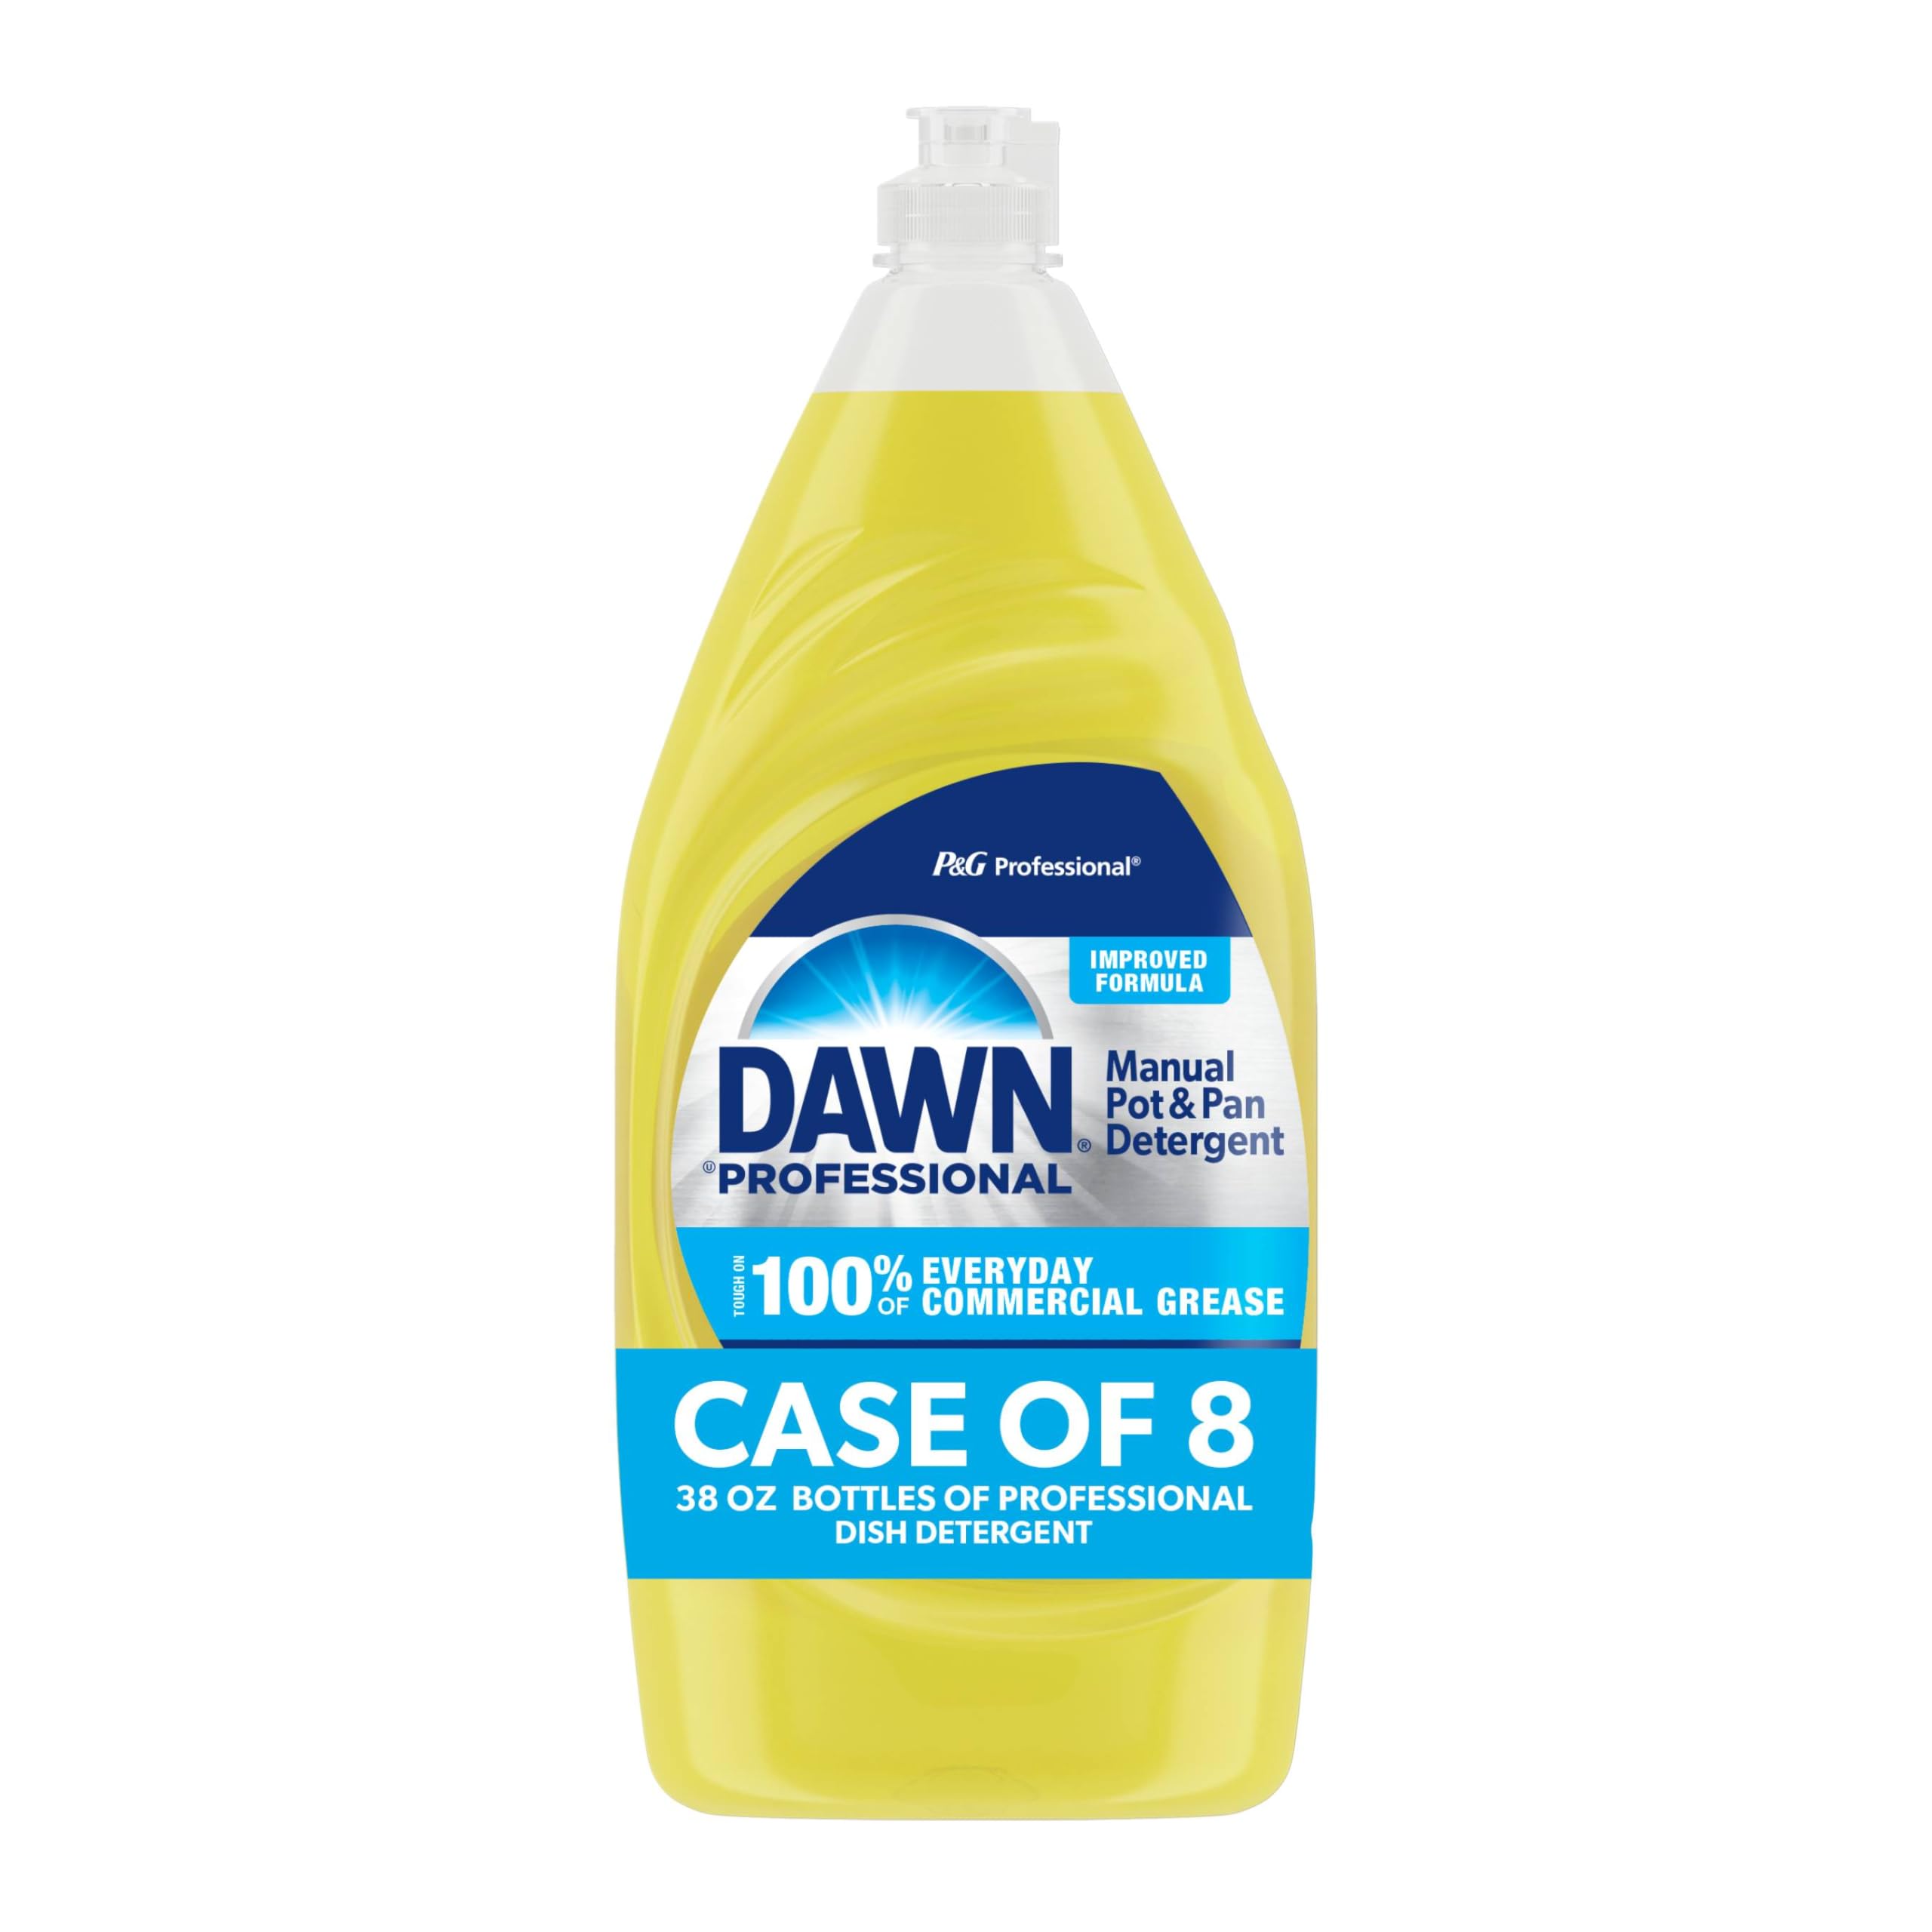 Dawn Dishwashing Liquid Soap Detergent, Bulk Degreaser Removes Greasy Foods from Pots, Pans and Dishes in Commercial Restaurant Kitchens, Lemon Scent, 38 oz. (Case of 8) (Packaging May Vary)